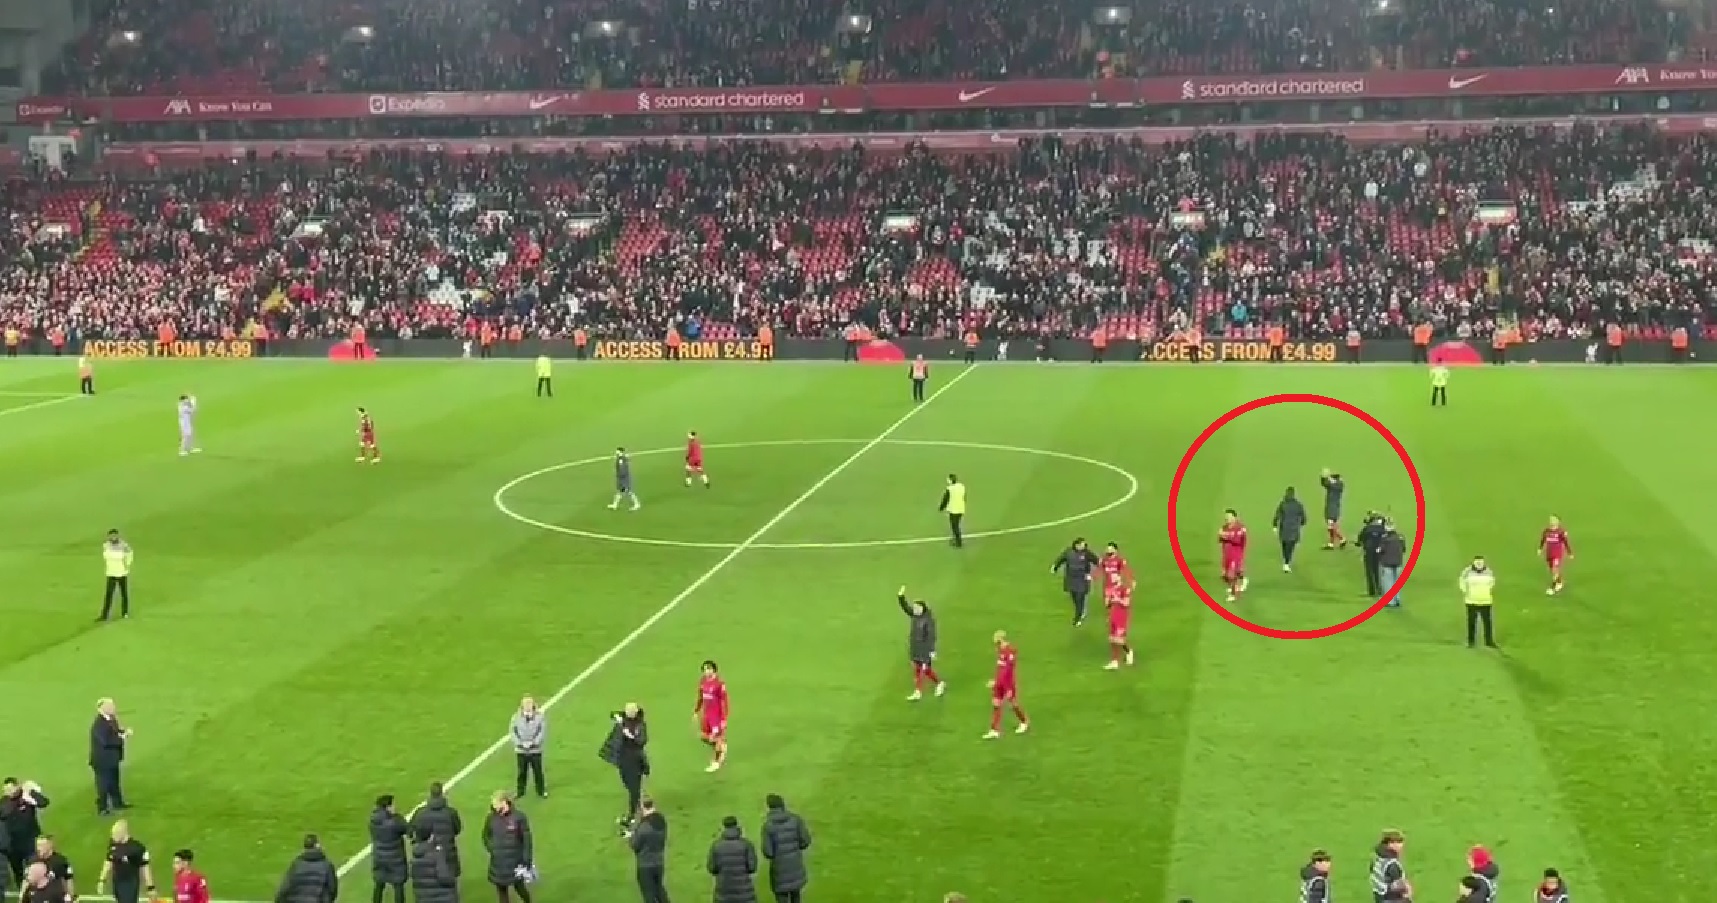 (Video) What happened between Klopp & Nunez after FT whistle is telling